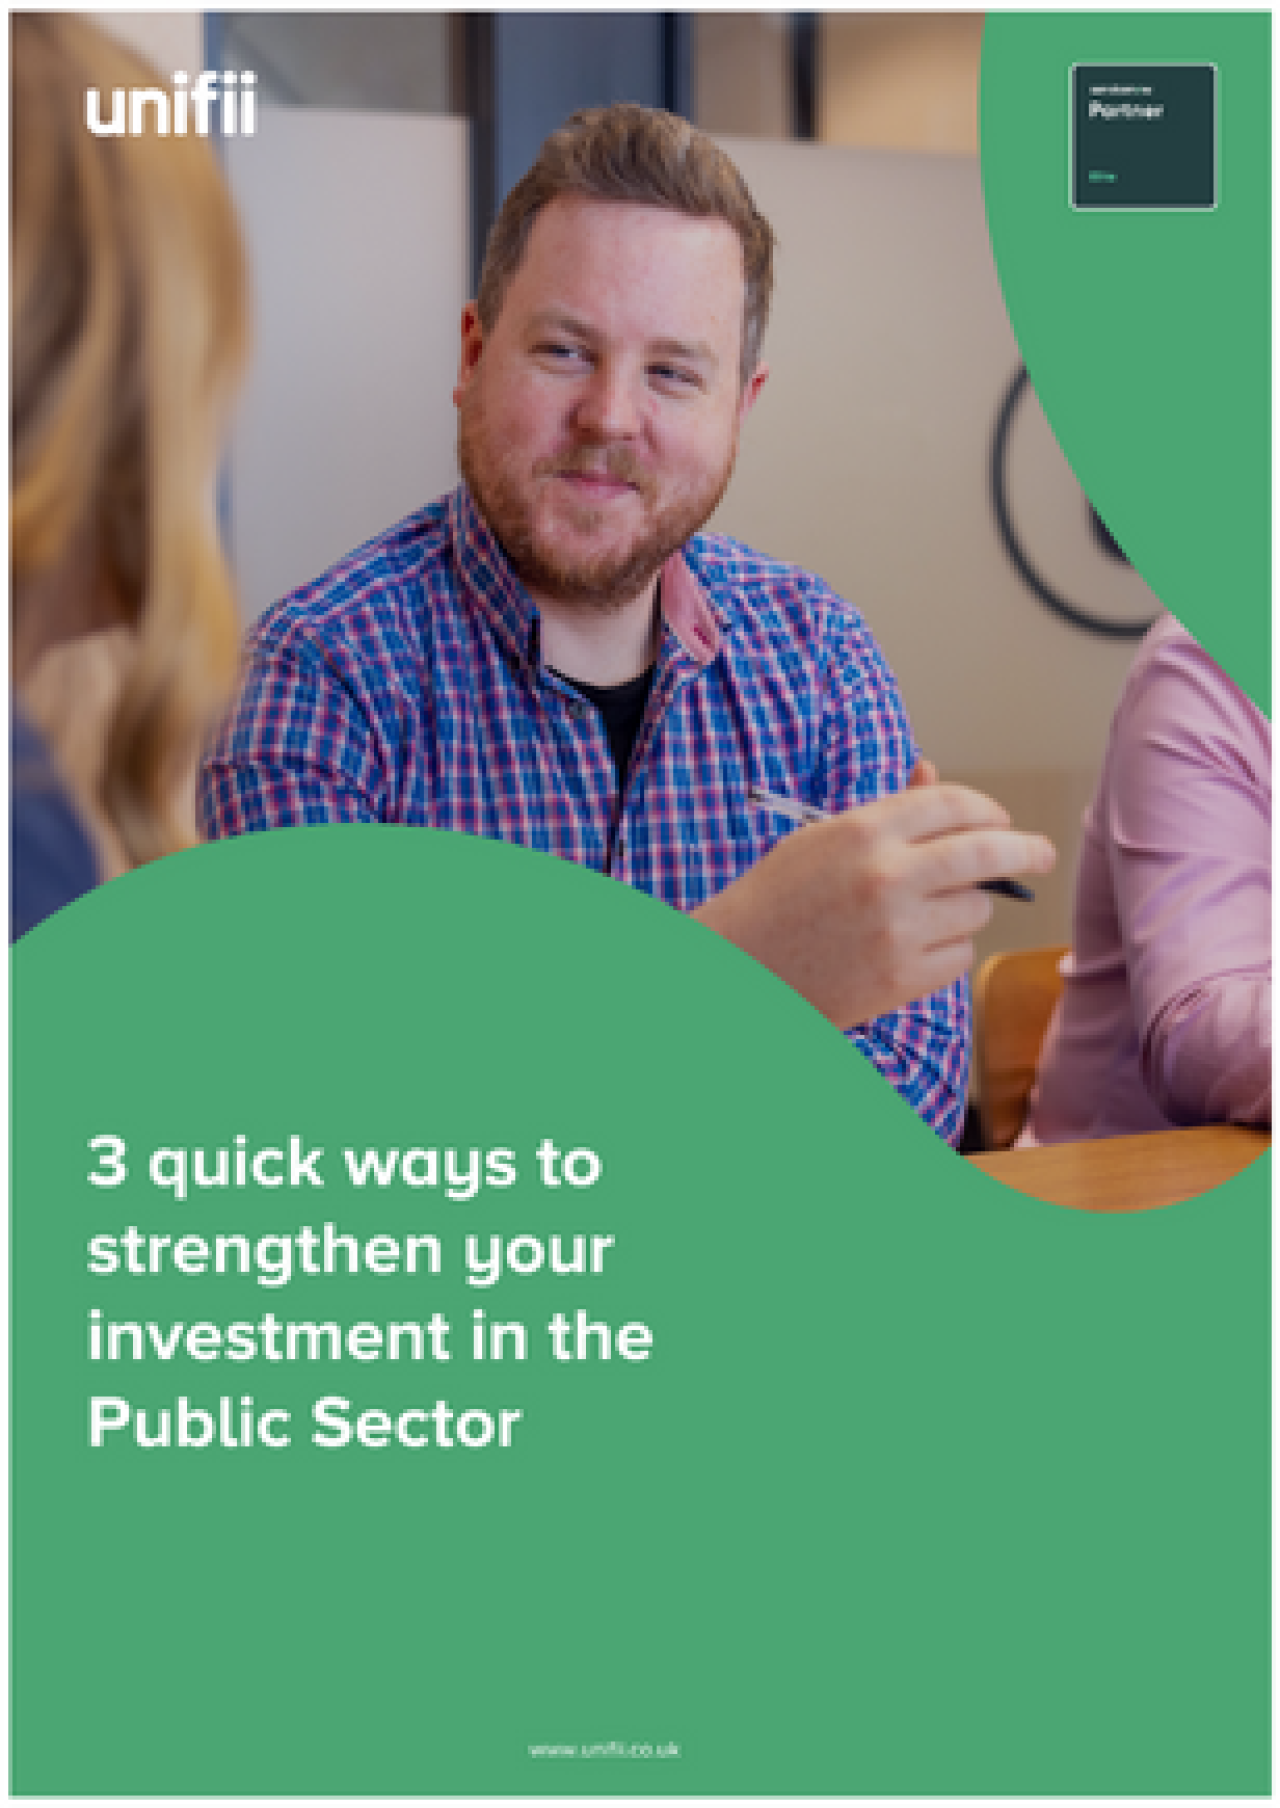 3 quick ways to strengthen your investment in the Public Sector.